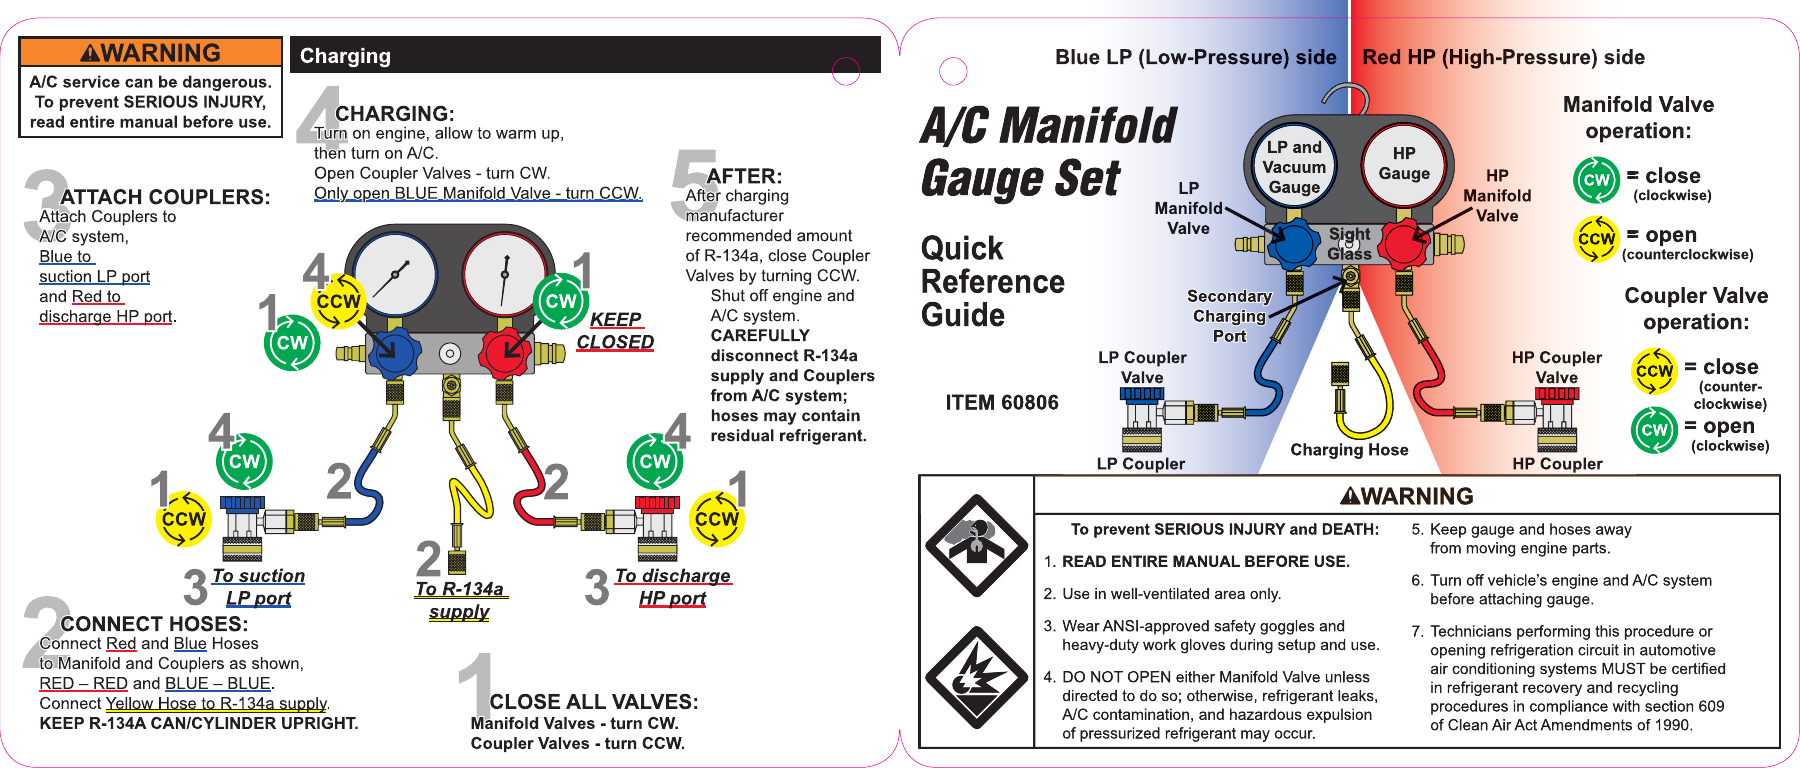 Page 1 of 2 - Quick Start Guide For The 60806 A/C Manifold Gauge Set Q60806